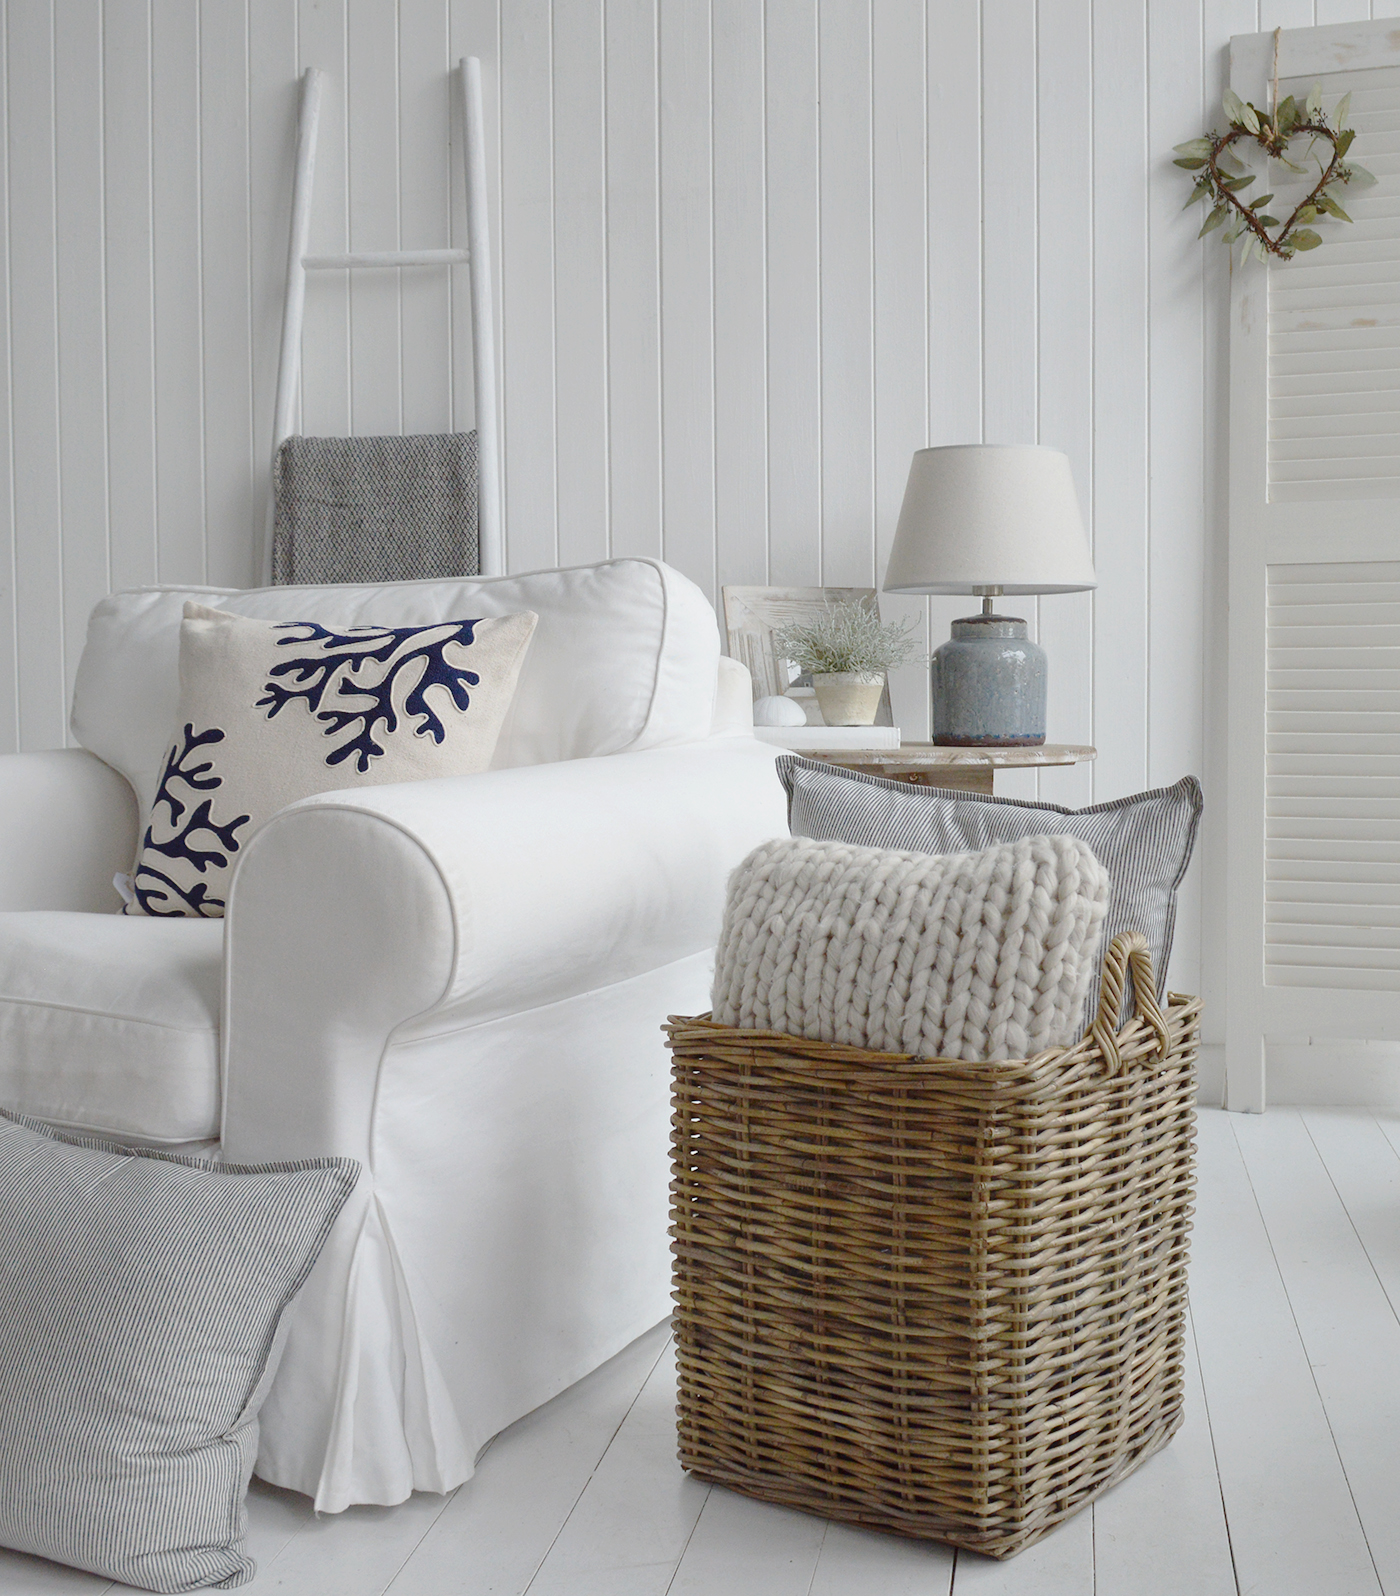 A Hamptons style living room in white with textural accessories for a relaxed space ... the Casco Bay basket filled with cushions, driftwood table and white Provincetown blanket ladder 